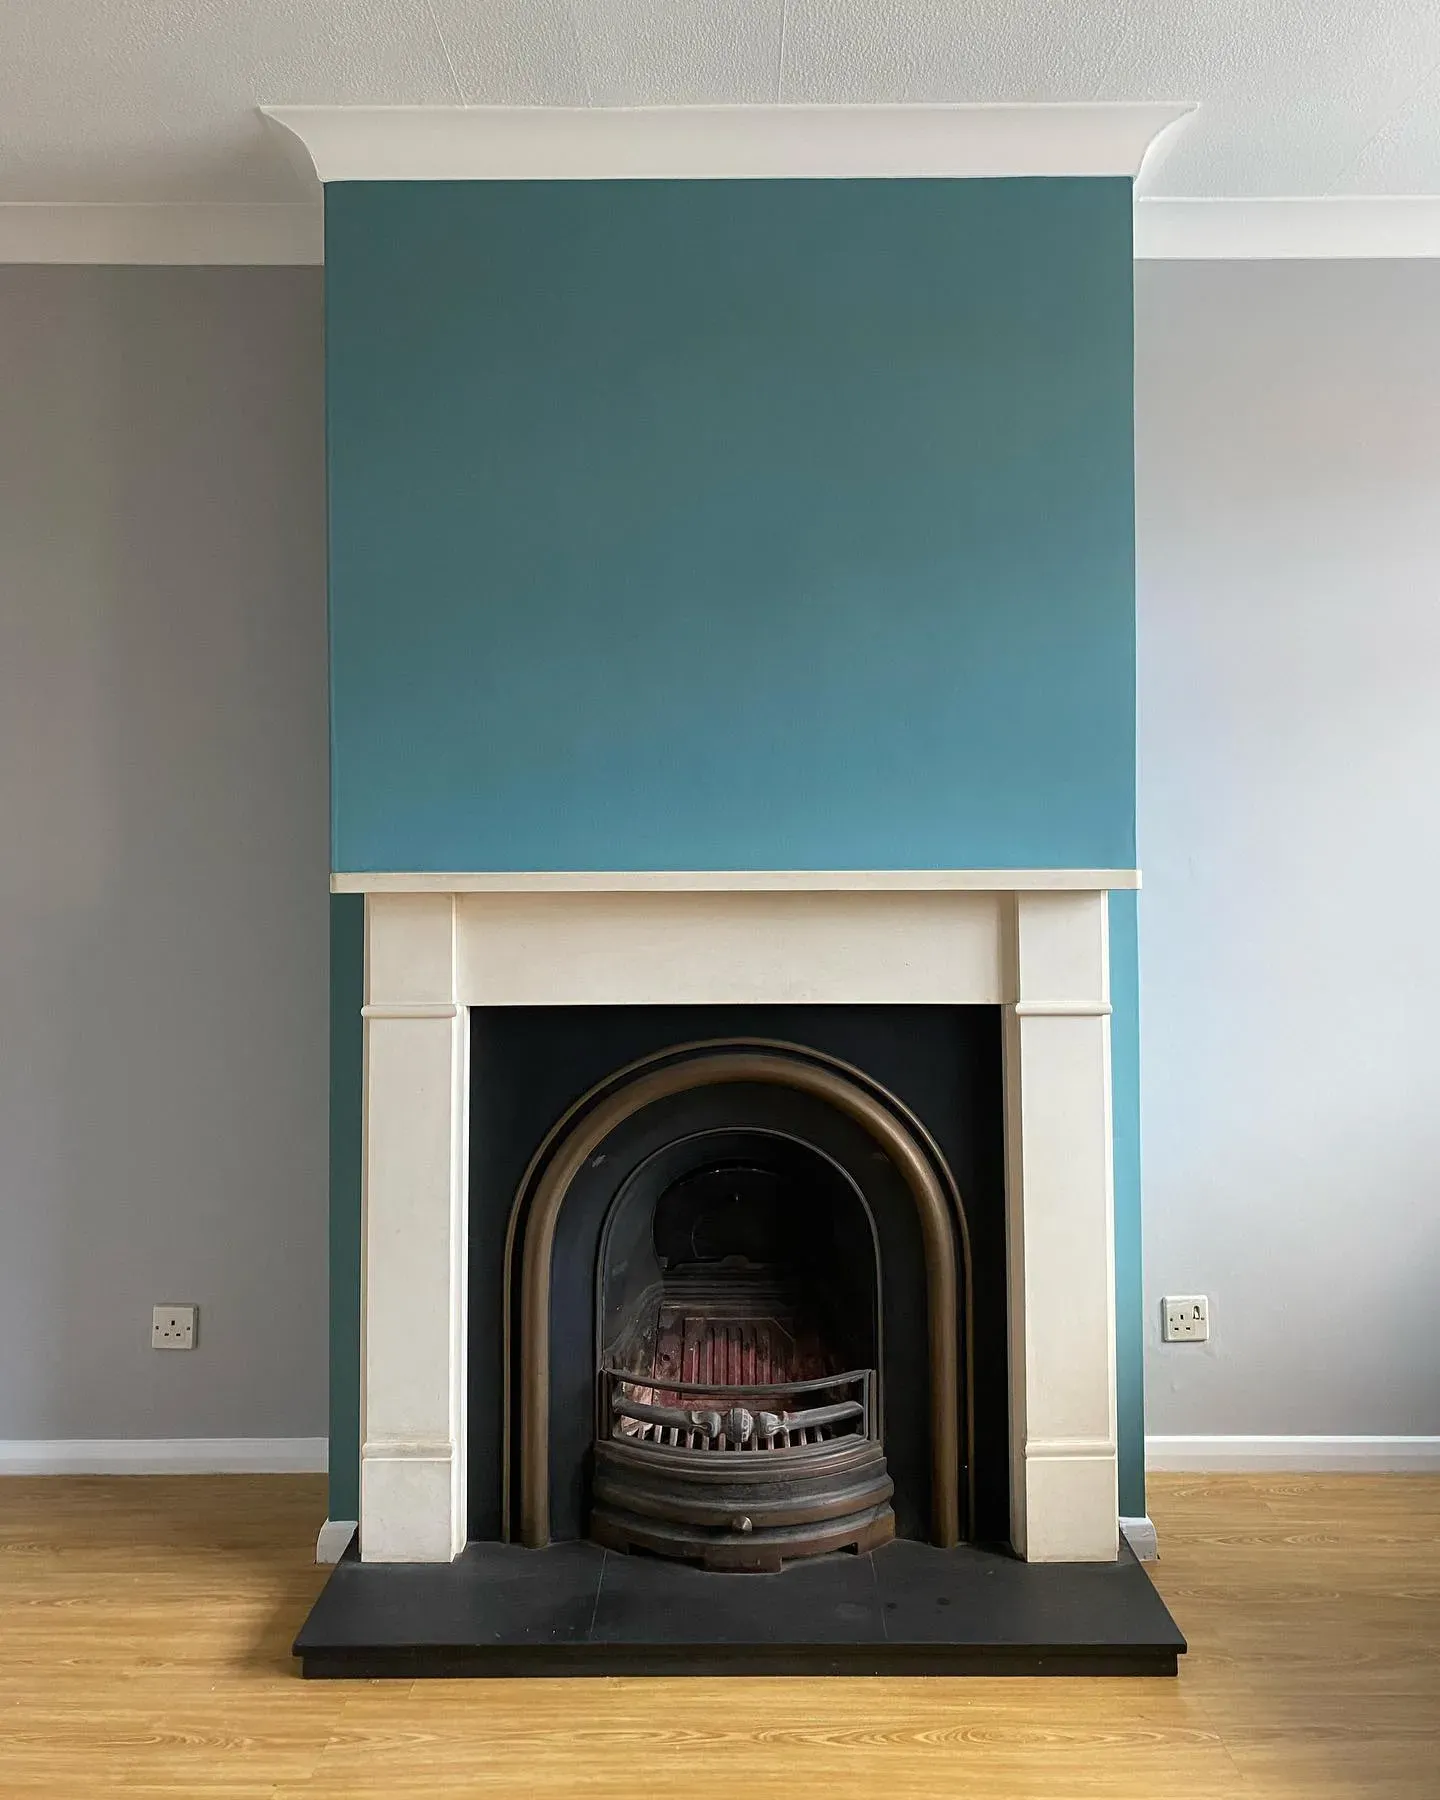 Dulux Maritime Teal living room fireplace 